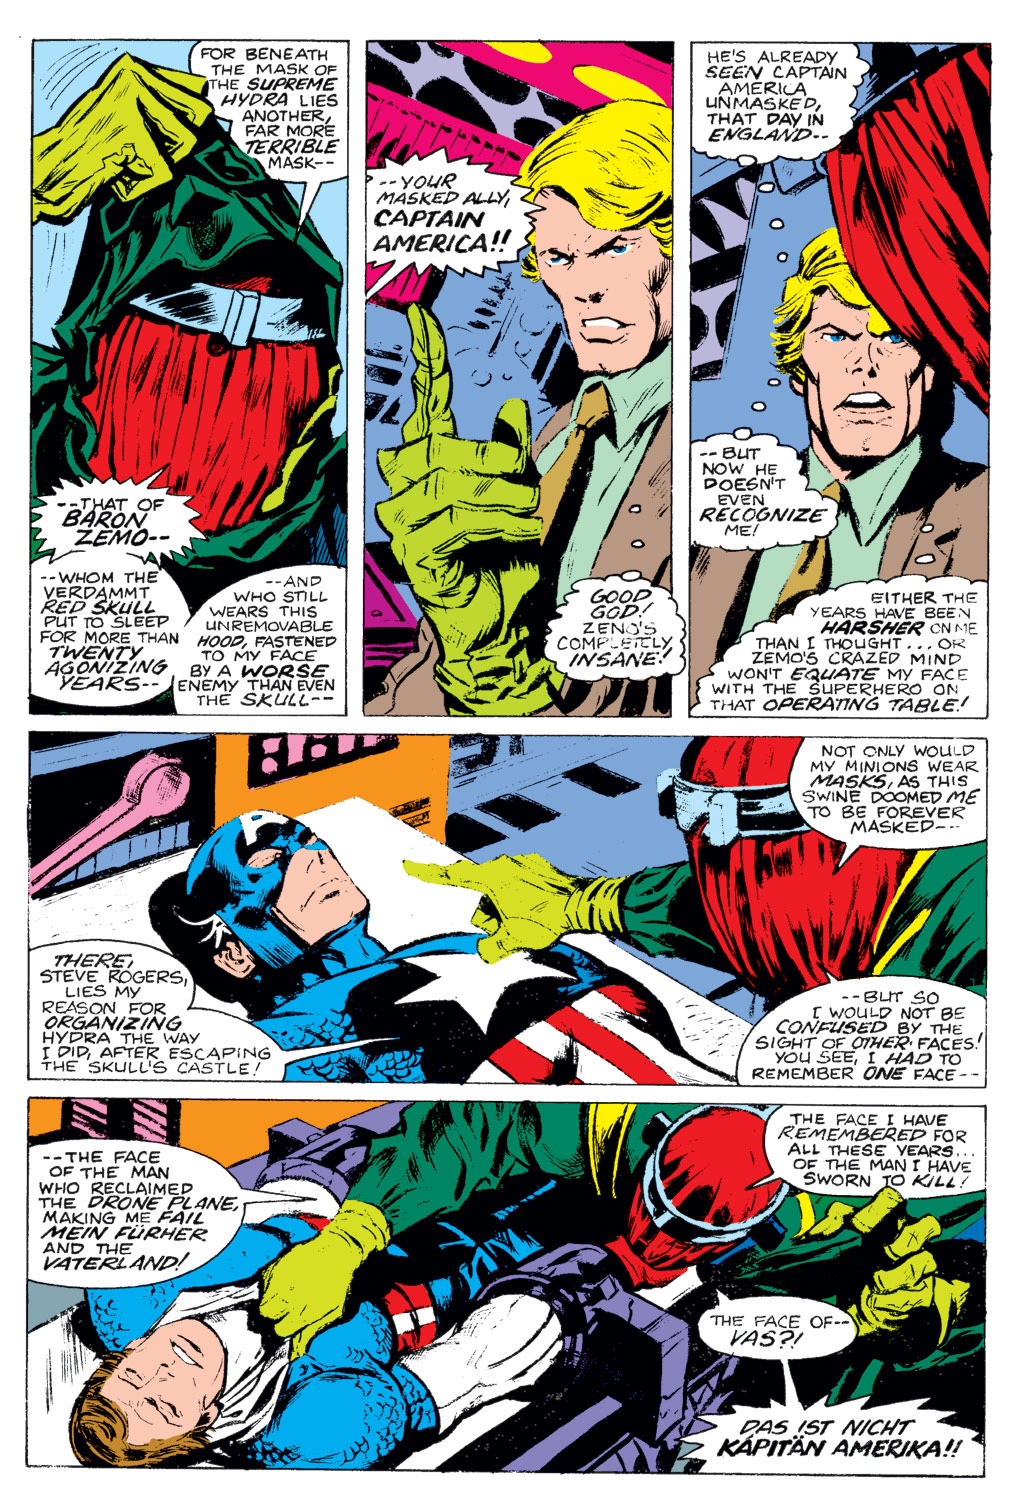 What If? (1977) issue 5 - Captain America hadn't vanished during World War Two - Page 25